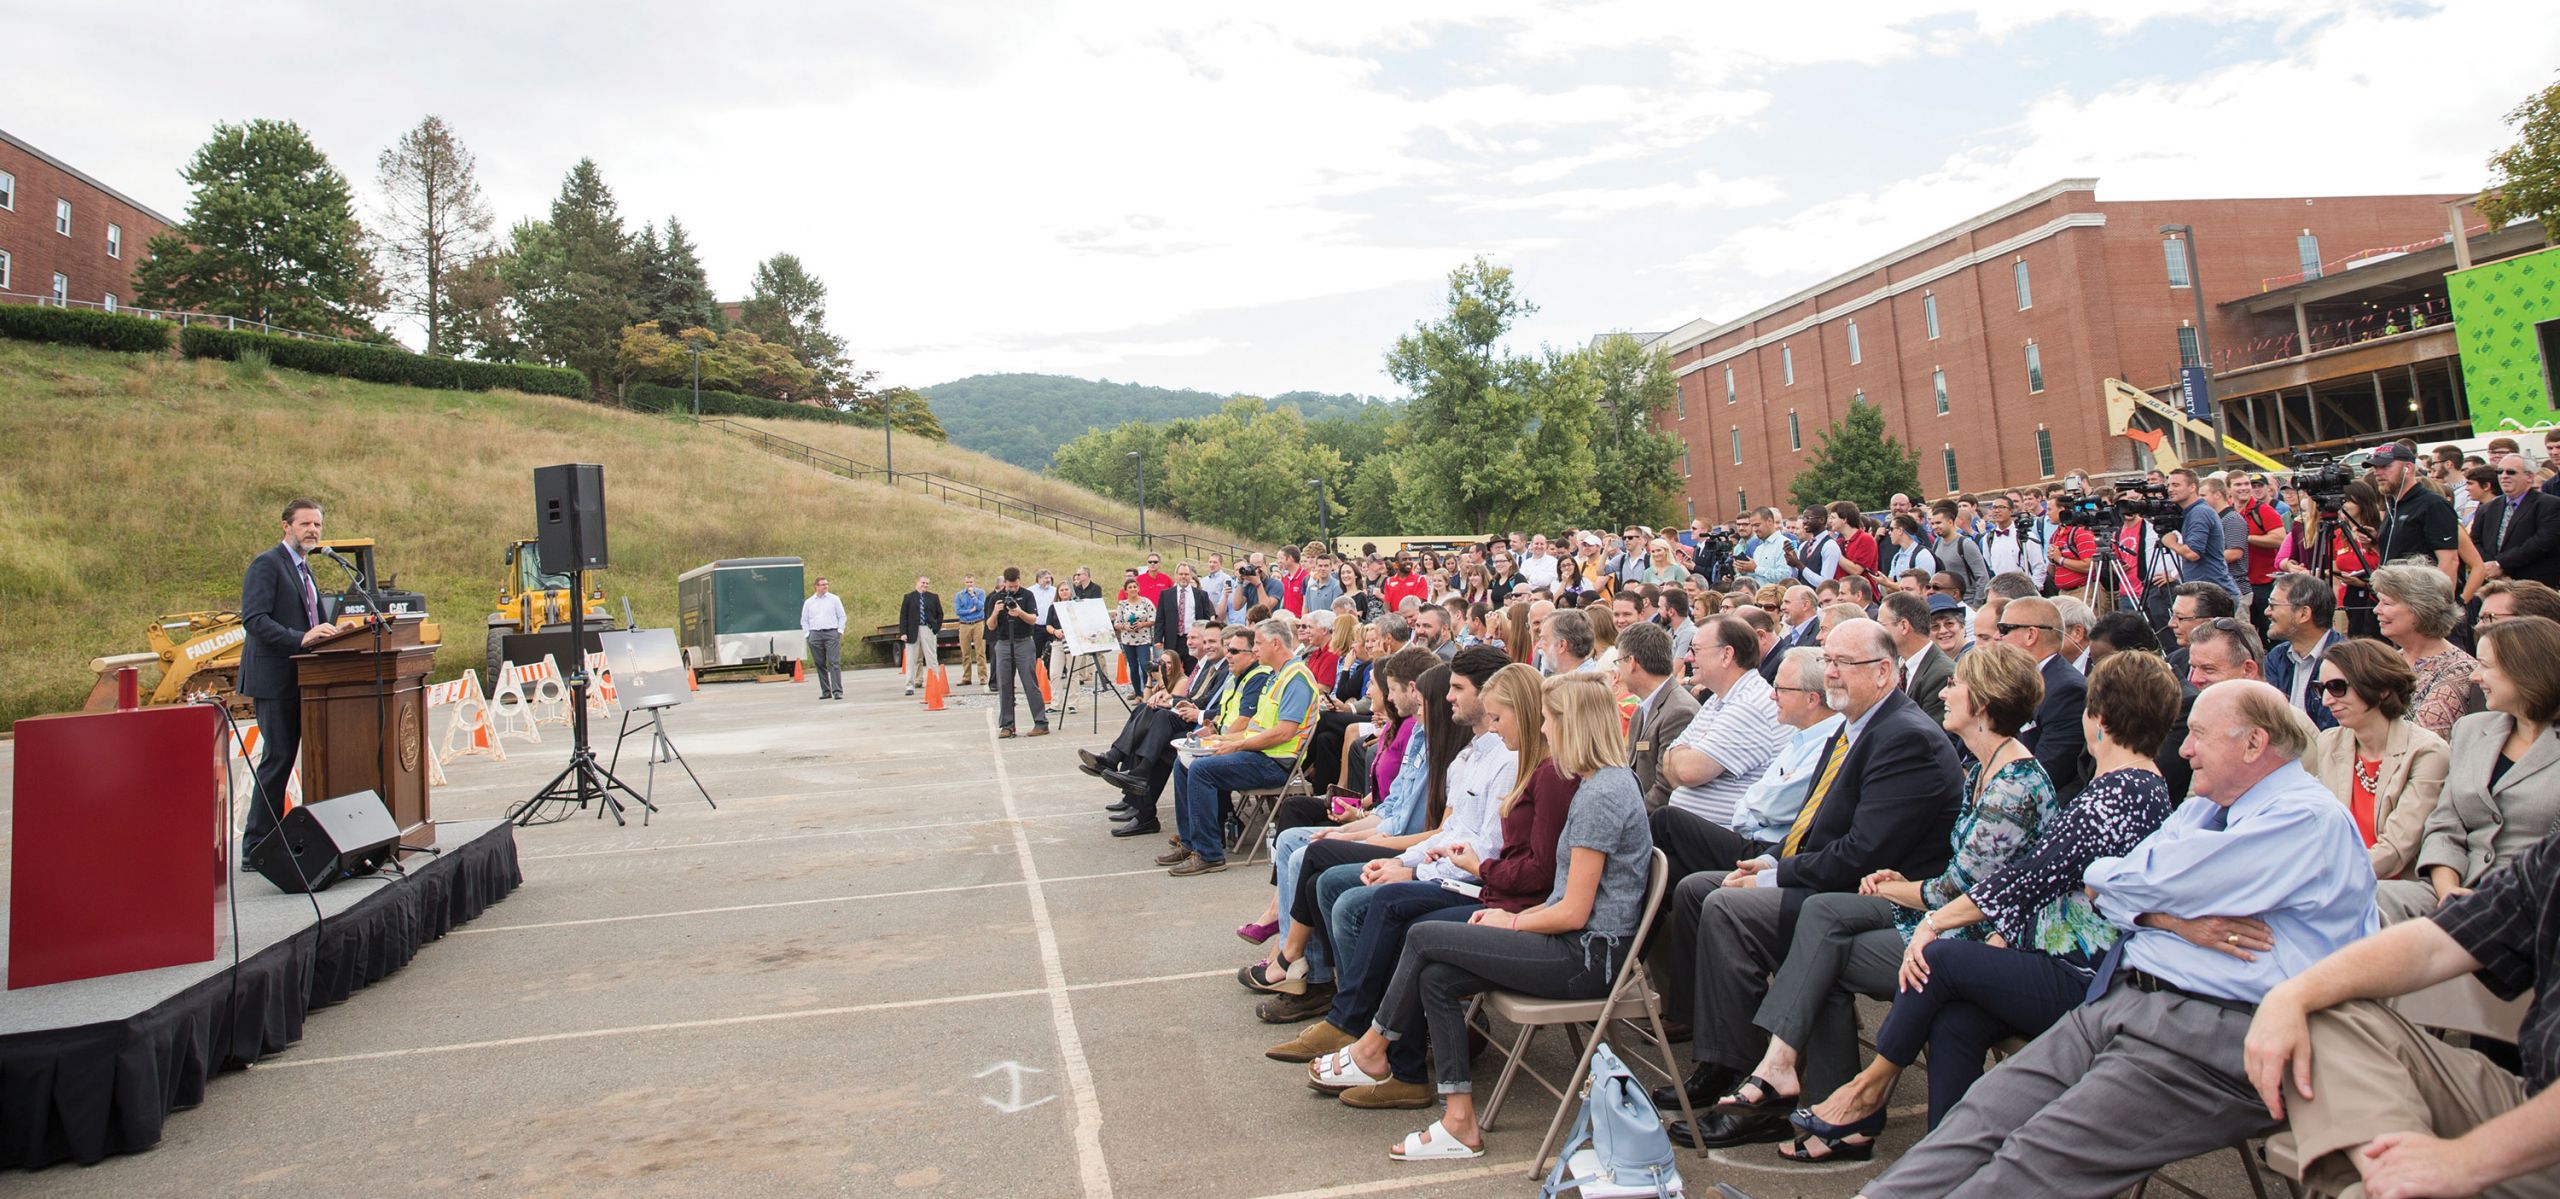 Faculty, staff, and students from the School of Divinity joined members of Liberty University’s administration on Aug. 31 to celebrate the groundbreaking for the Freedom Tower.